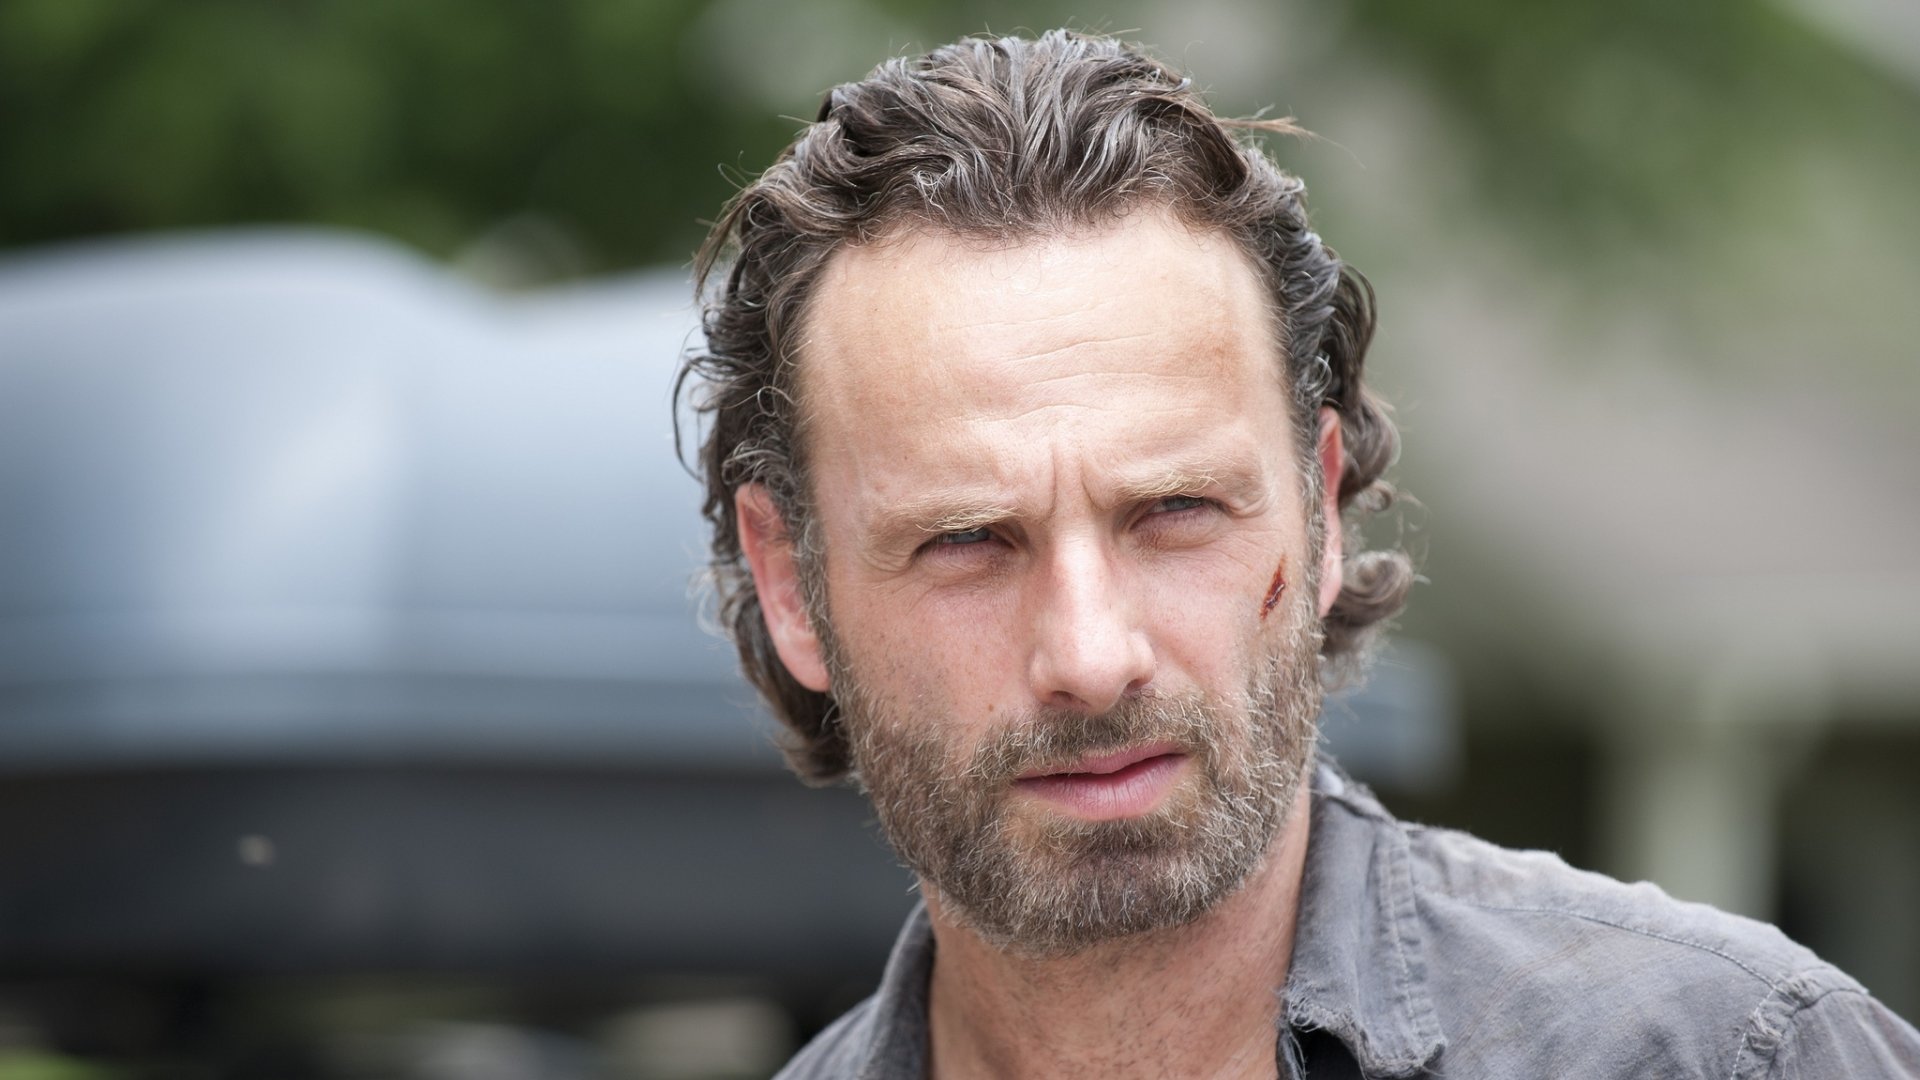 Download full hd 1920x1080 Rick Grimes PC background ID:190368 for free